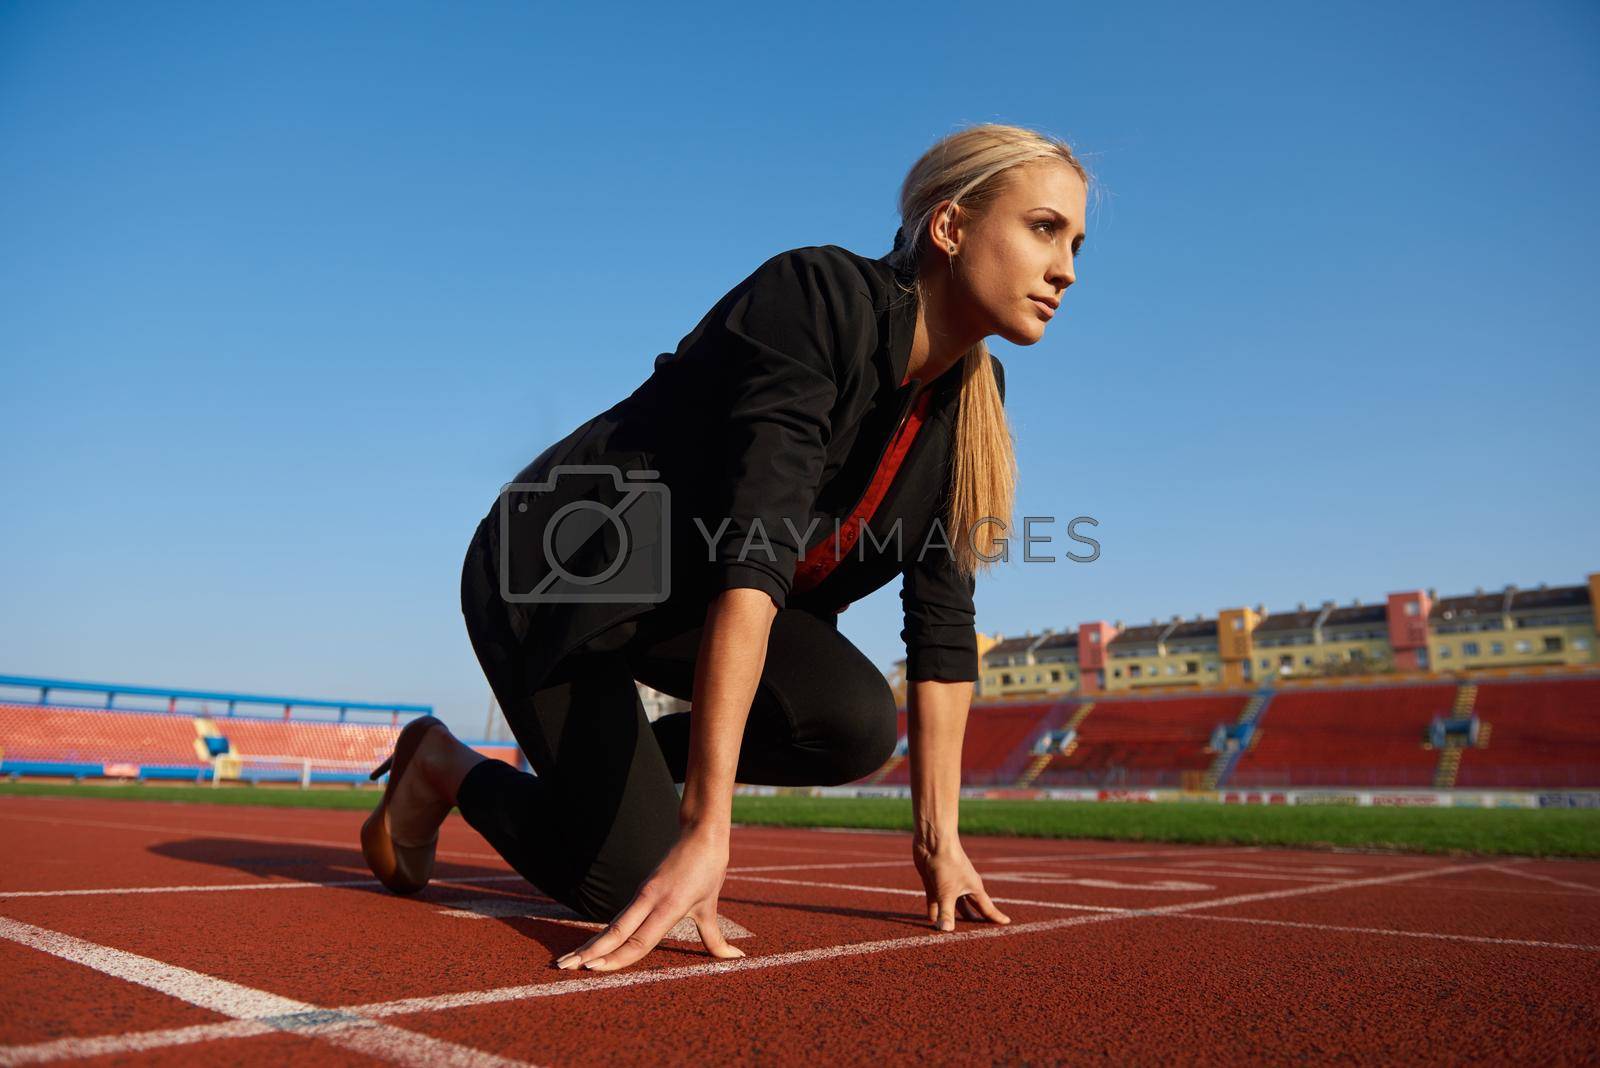 Royalty free image of business woman ready to sprint by dotshock